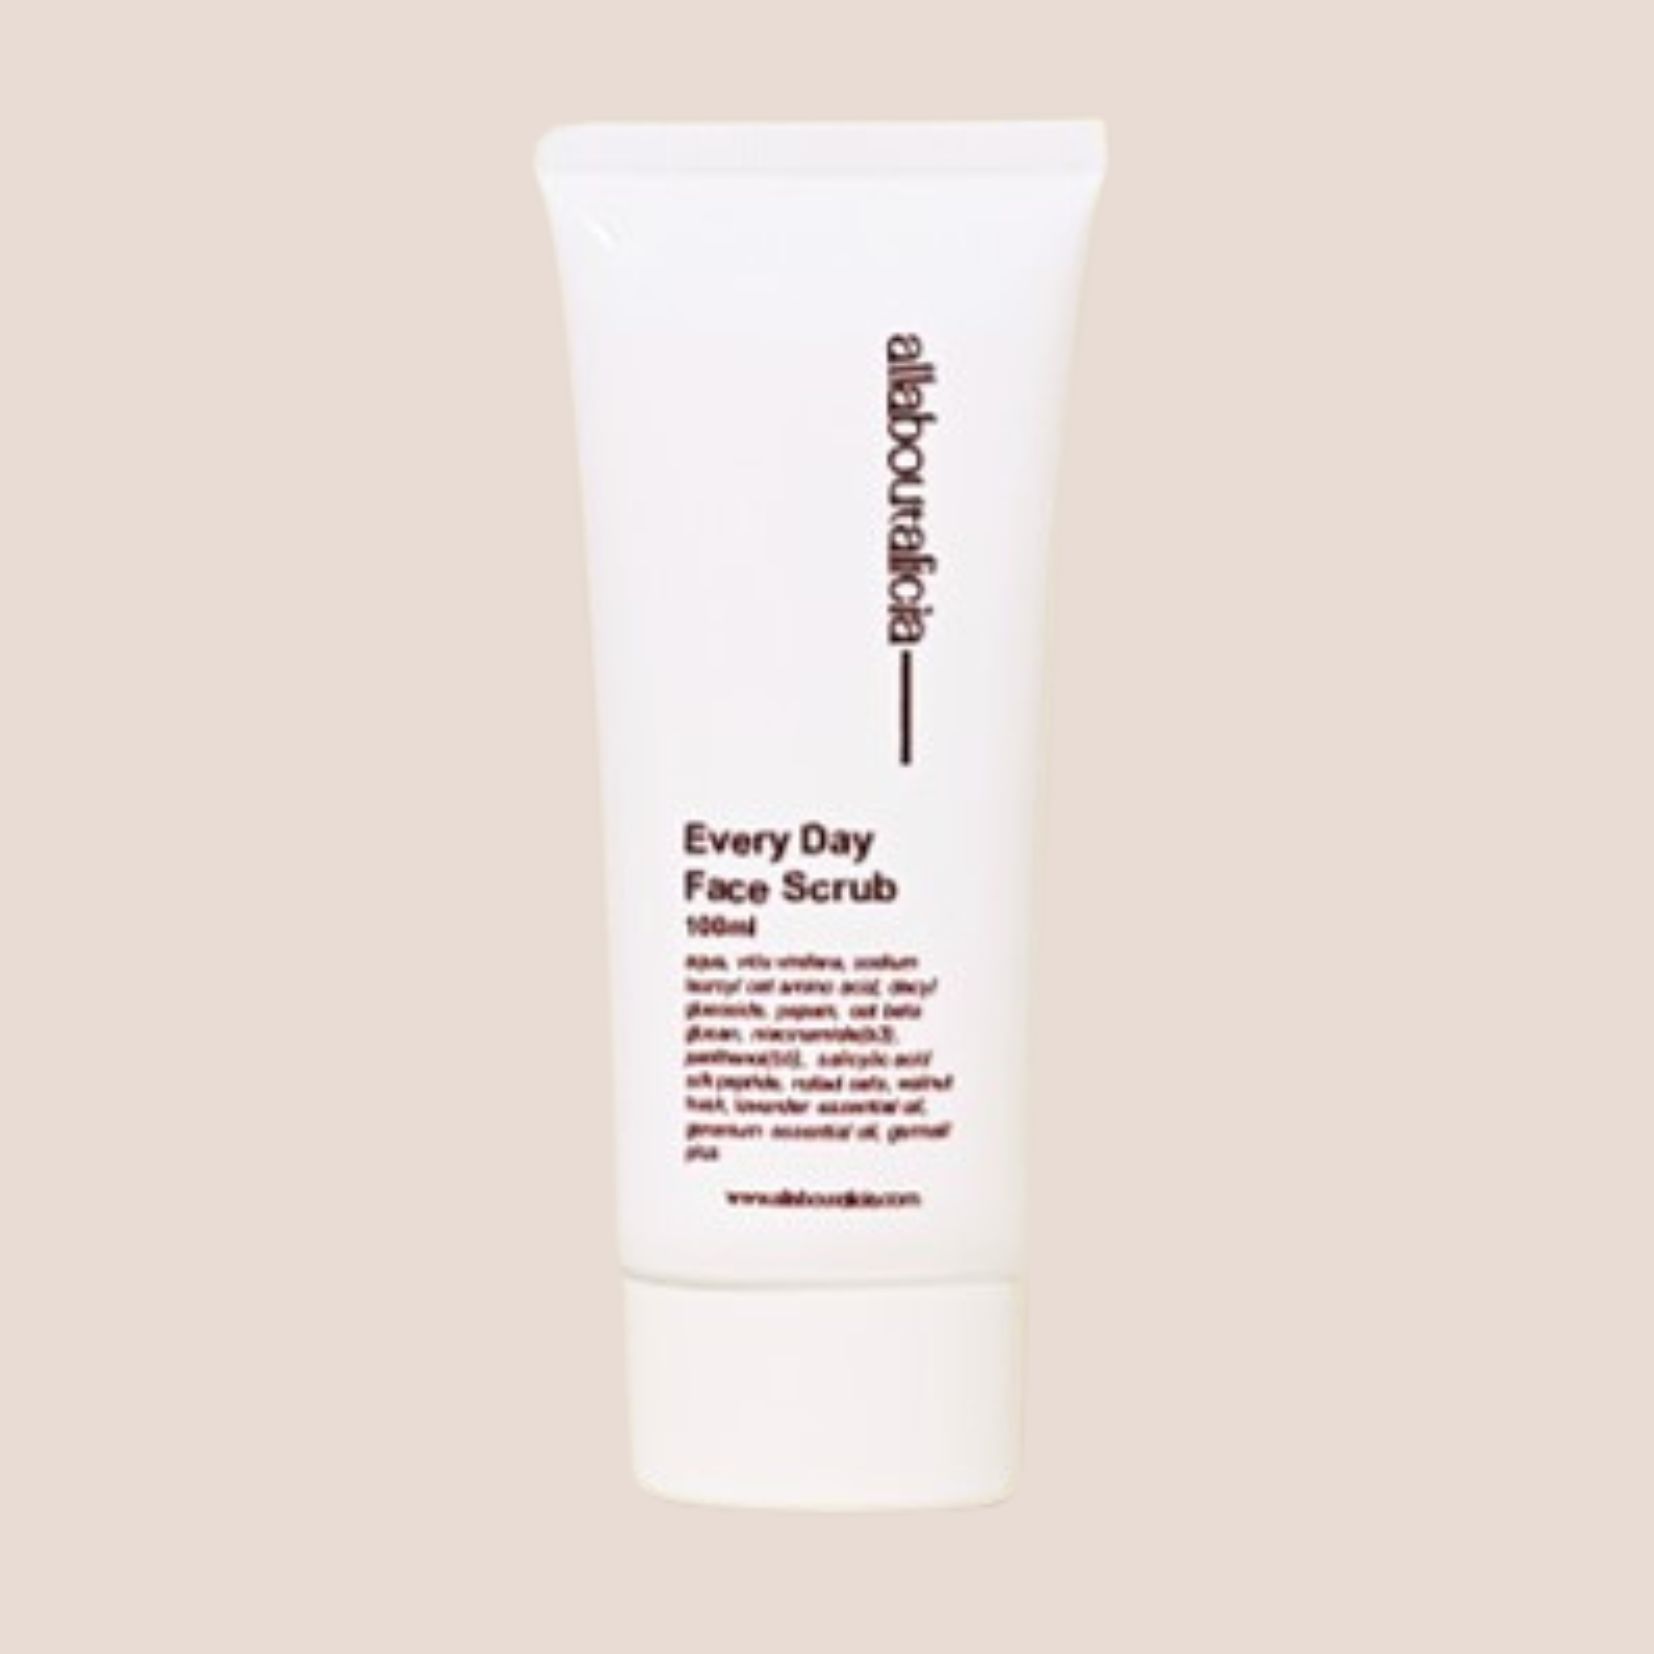 Every Day Face Scrub